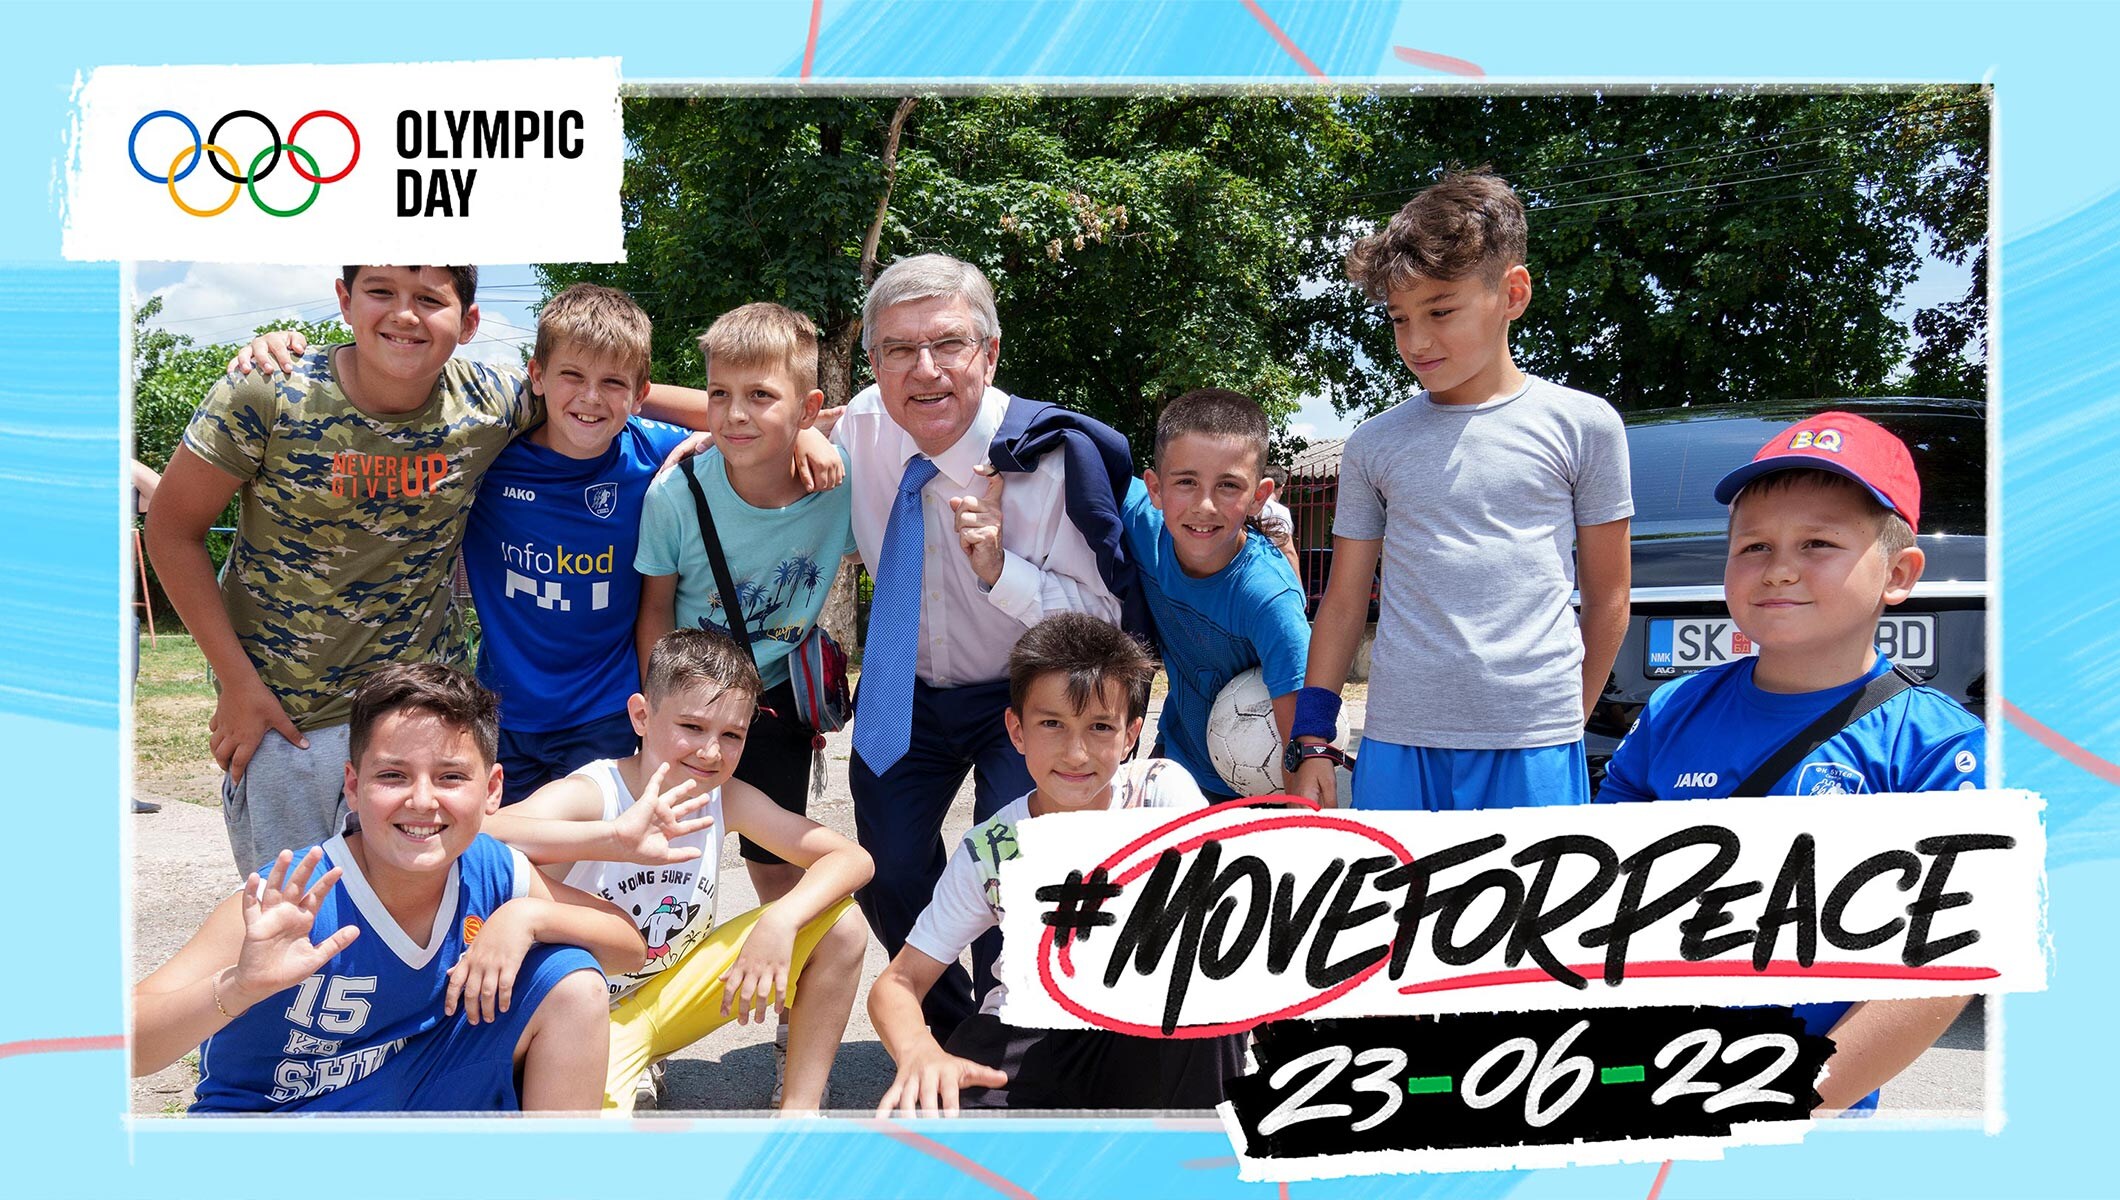 IOC President, Thomas Bach attends the Olympic Day celebration at a local school in Skopje